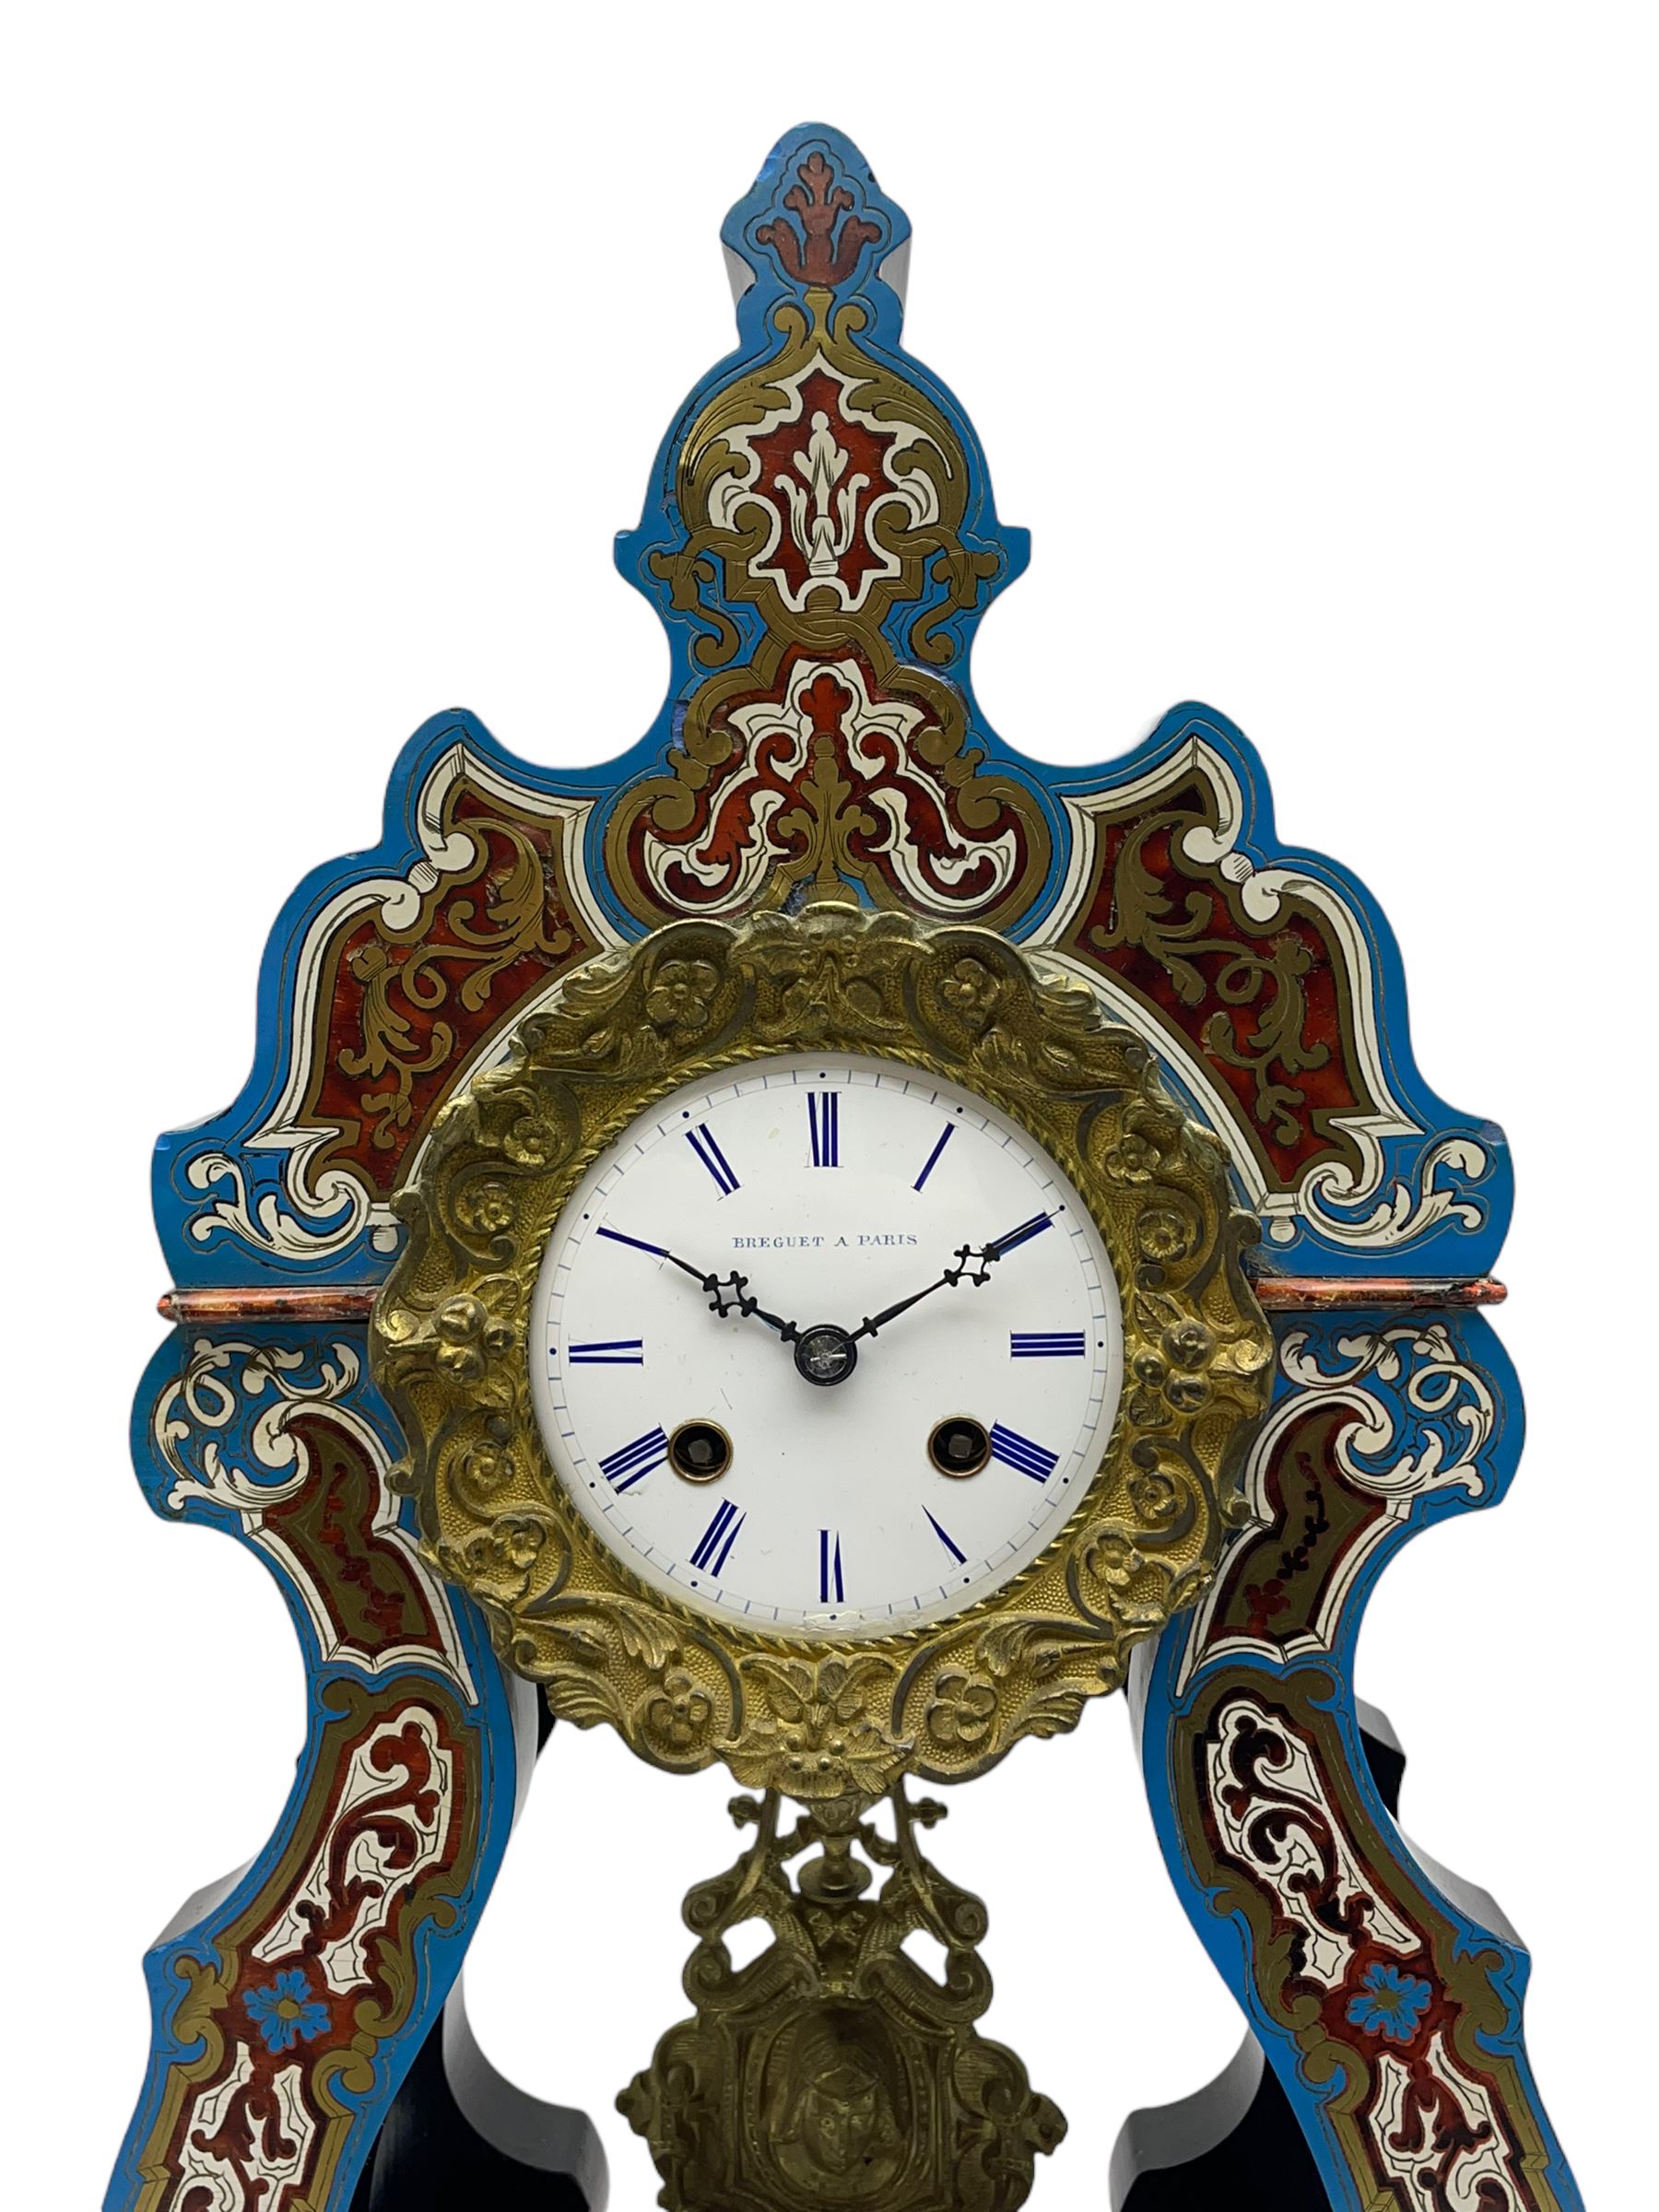 Breguet A Paris - Mid-19th century 8-day French portico clock - Image 2 of 8